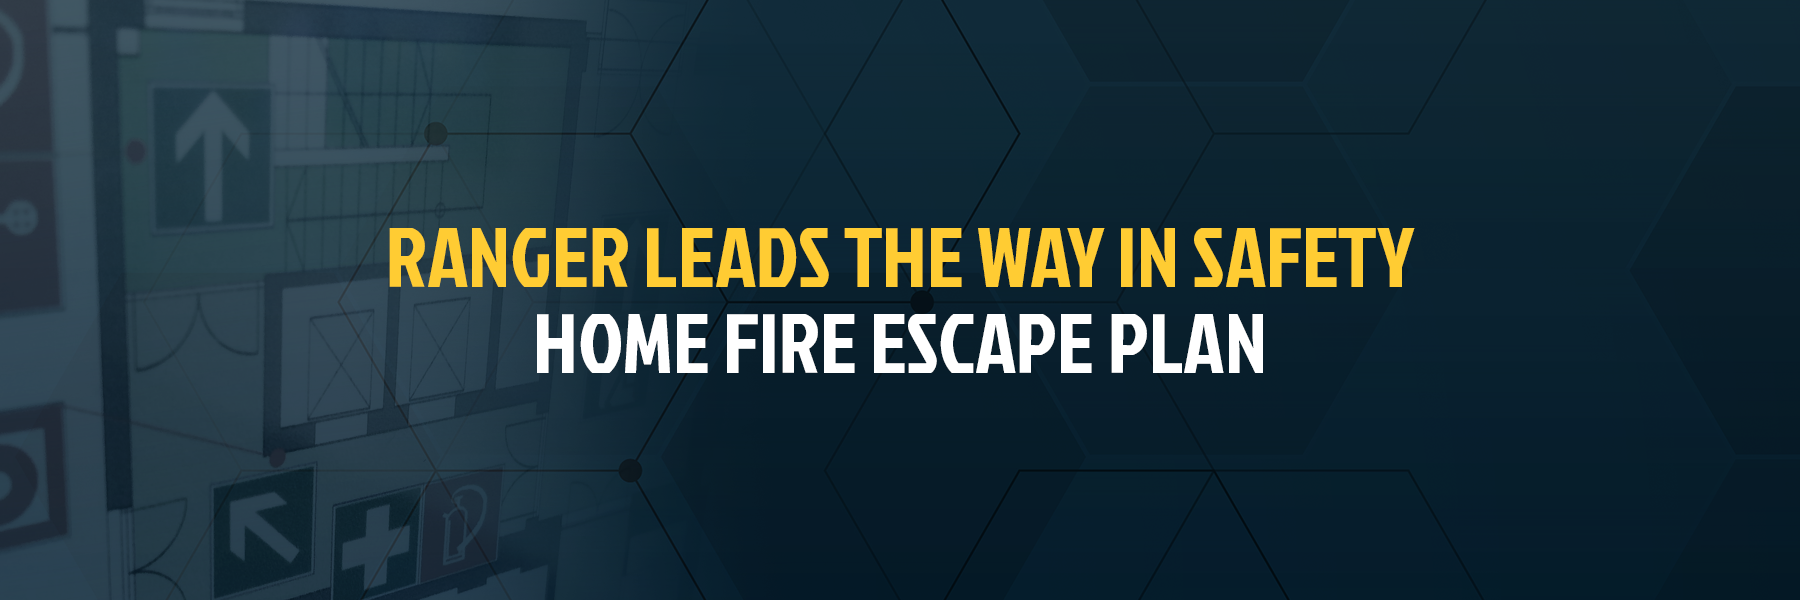 Home Fire Escape Plan Safety Moment